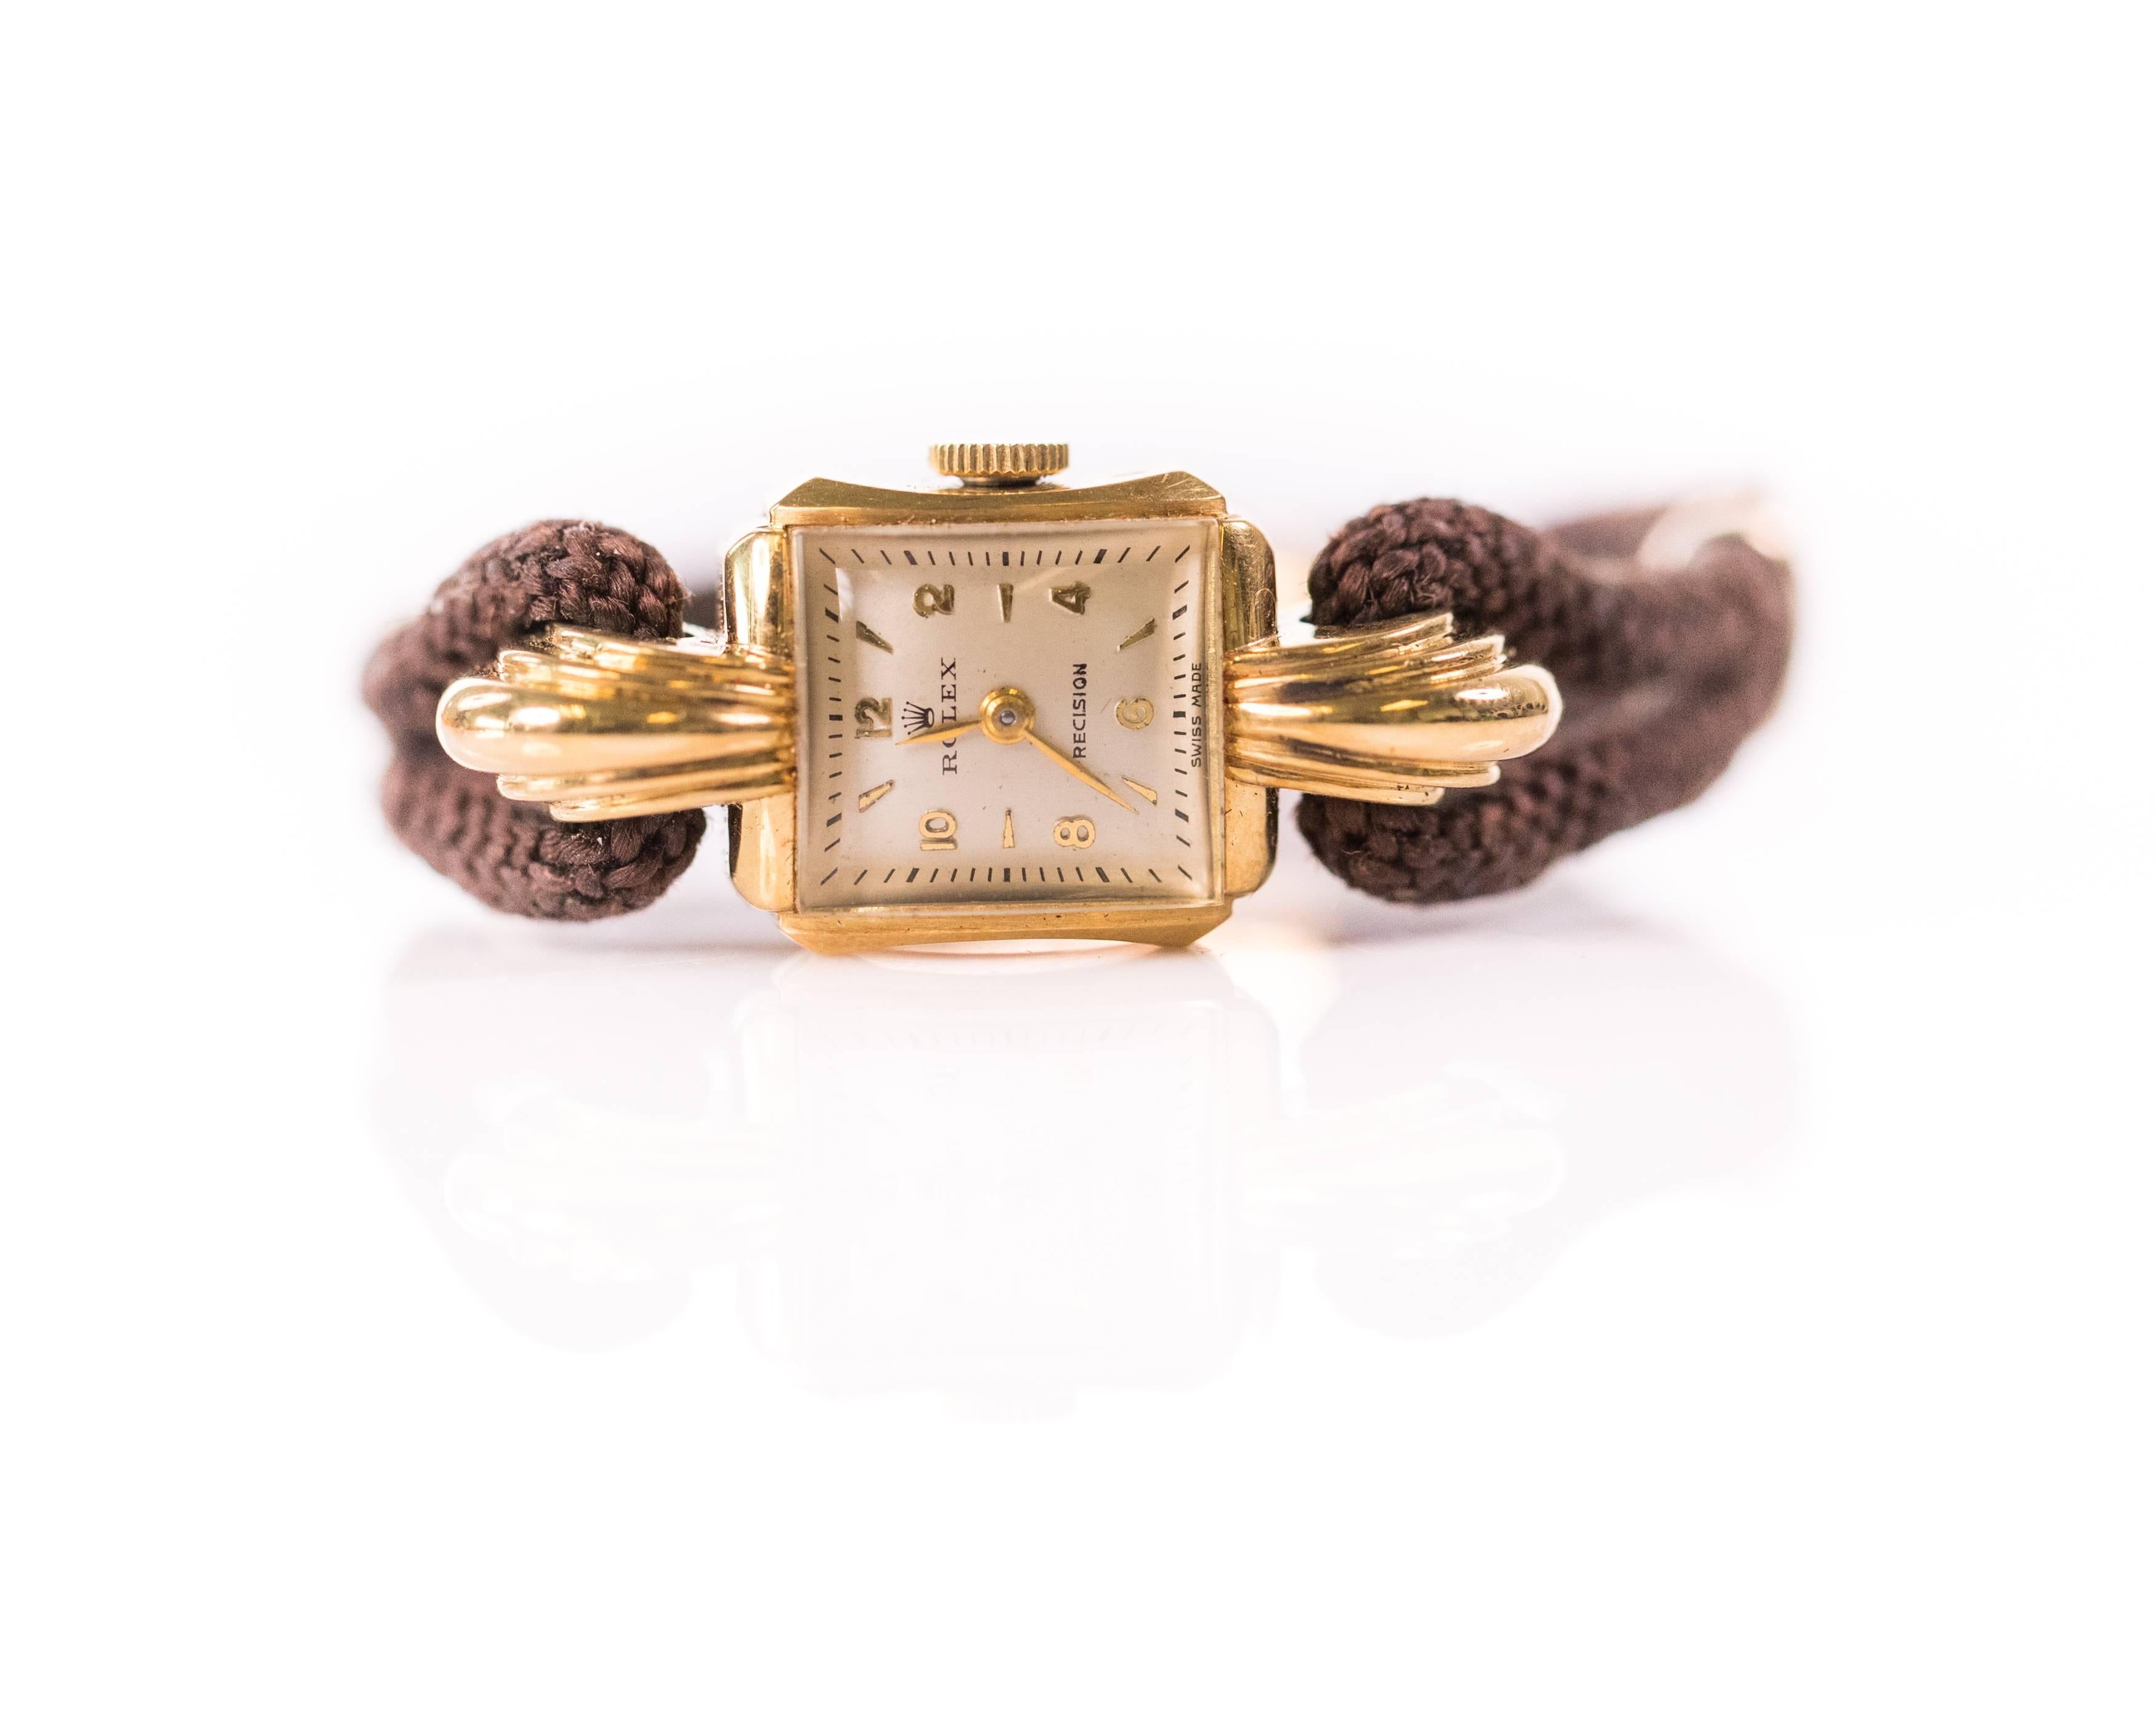 Wear this Swiss 1959 Rolex Ladies Precision 14 Karat Yellow Gold Watch anywhere, every day. It features a 14 karat yellow gold case, decorative Art Deco style lugs, ivory colored dial with gold stick and number markers, acrylic crystal and manual